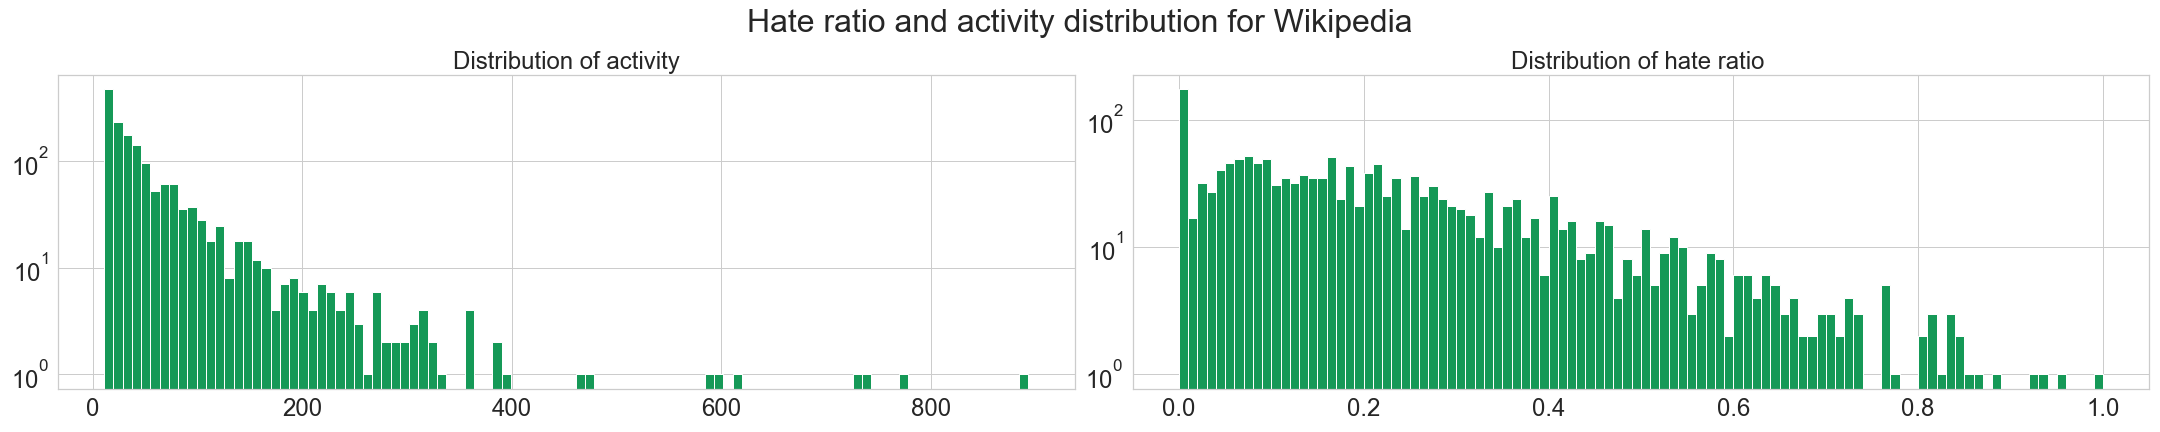 Distribution of activity and hate ratio for Wikipedia